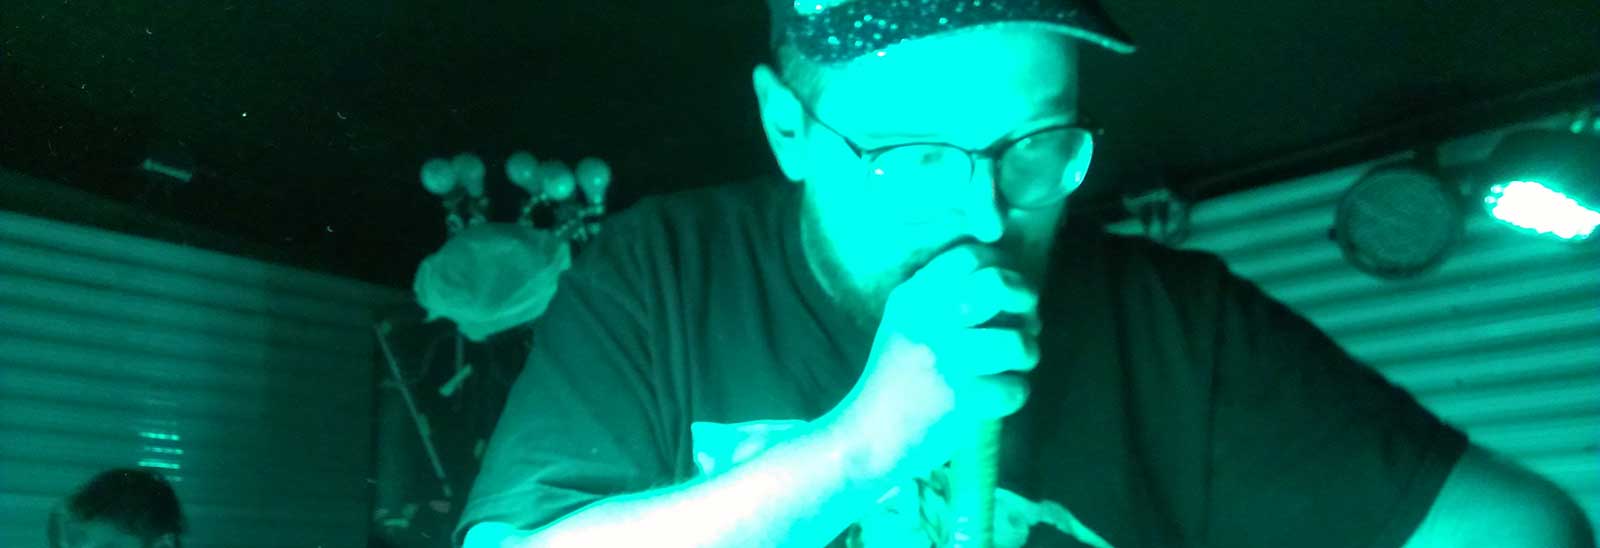 dan deacon playing at kilby court